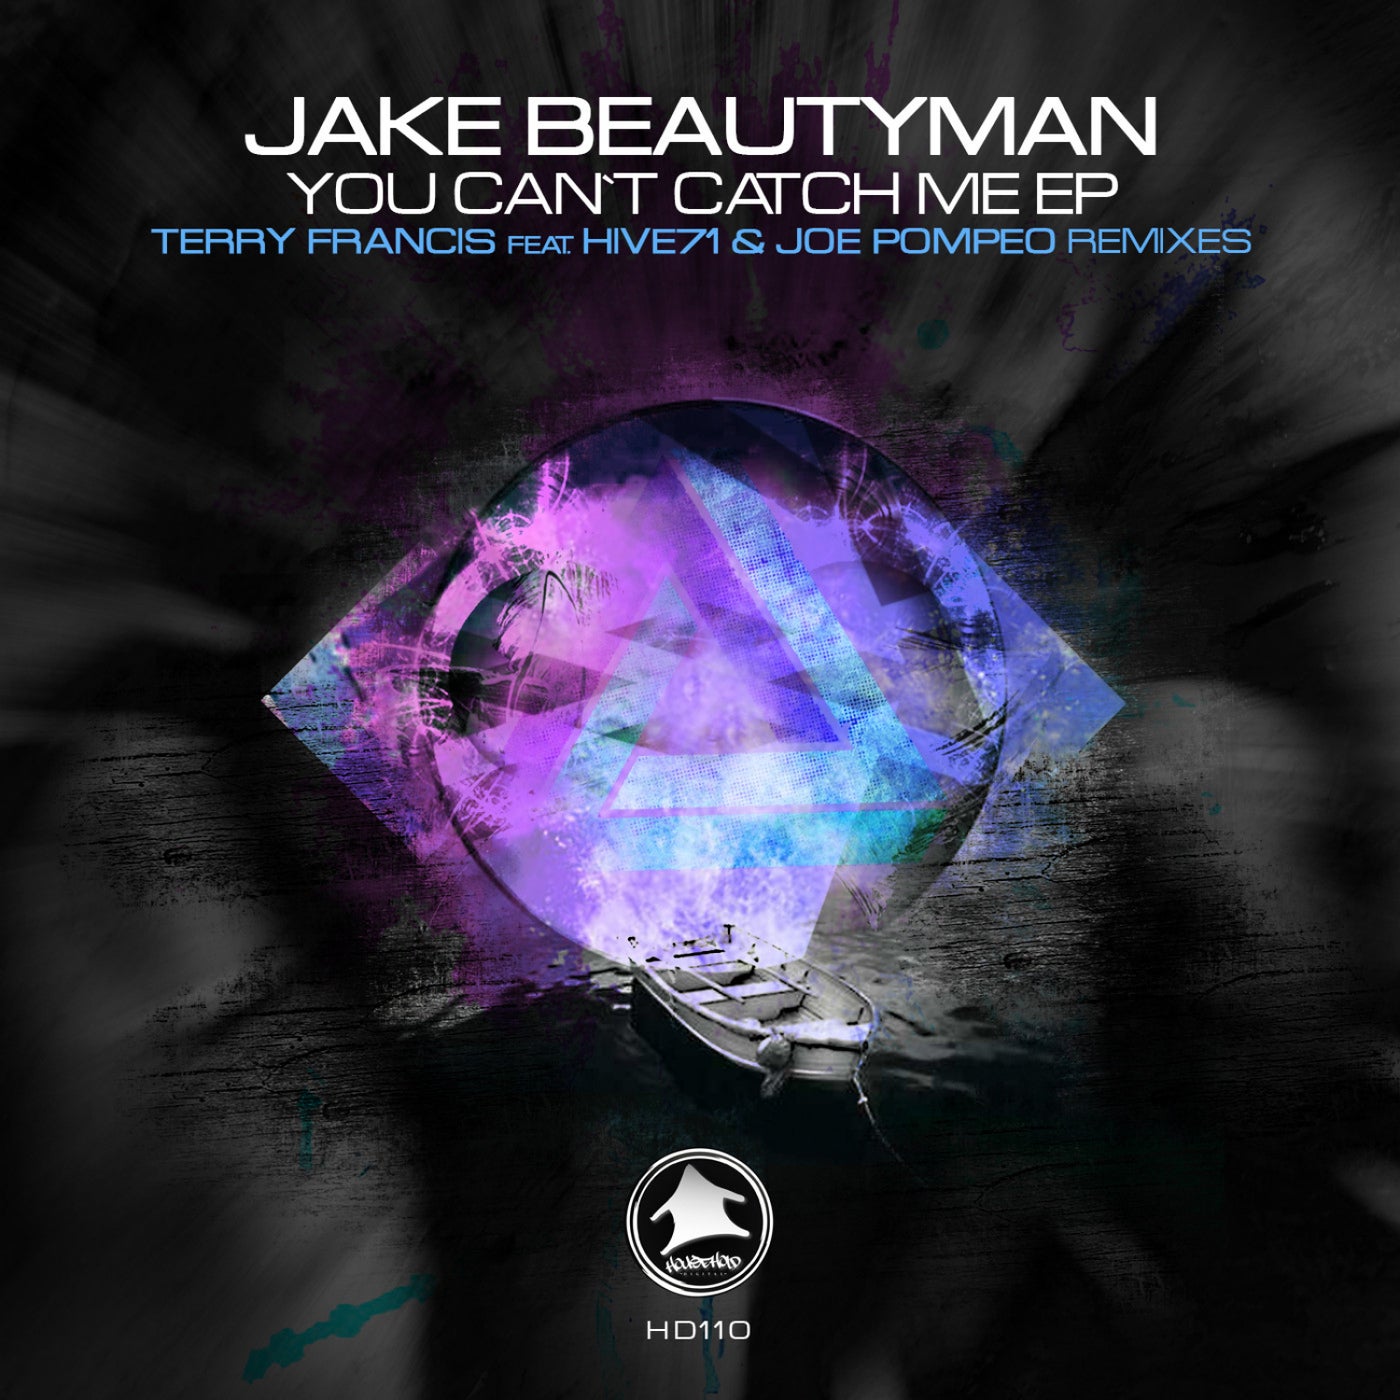 Jake Beautyman – You Can’t Catch Me EP [HD110]